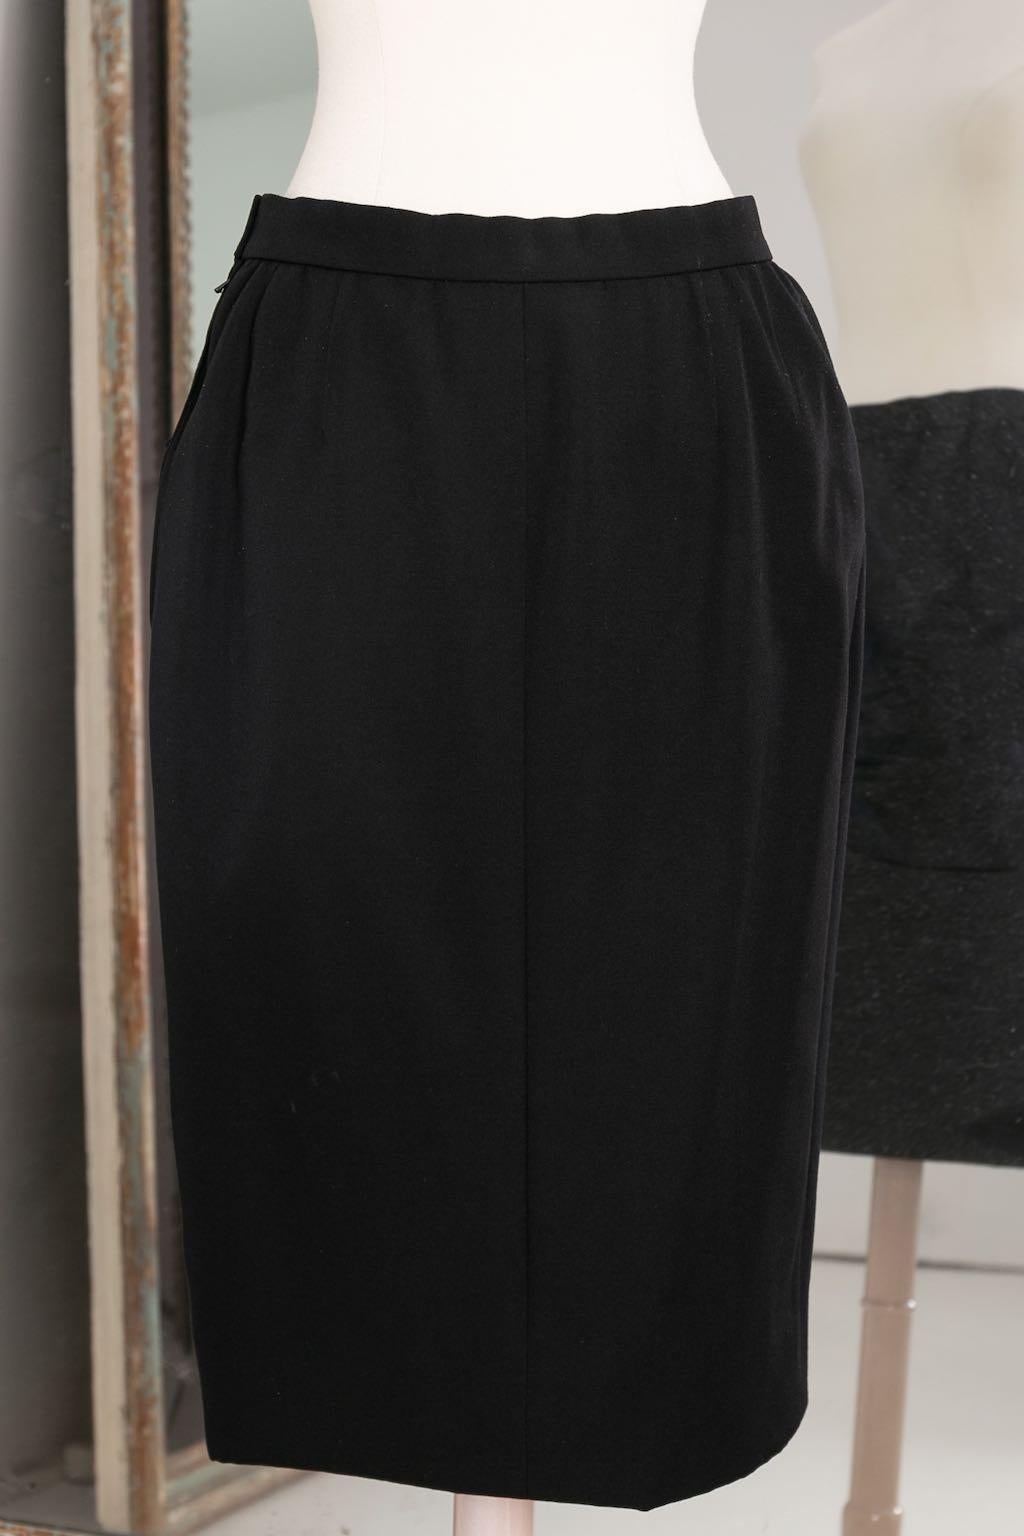 Yves Saint Laurent Haute Couture Black Skirt and Jacket Set, circa 1981/1982 For Sale 5